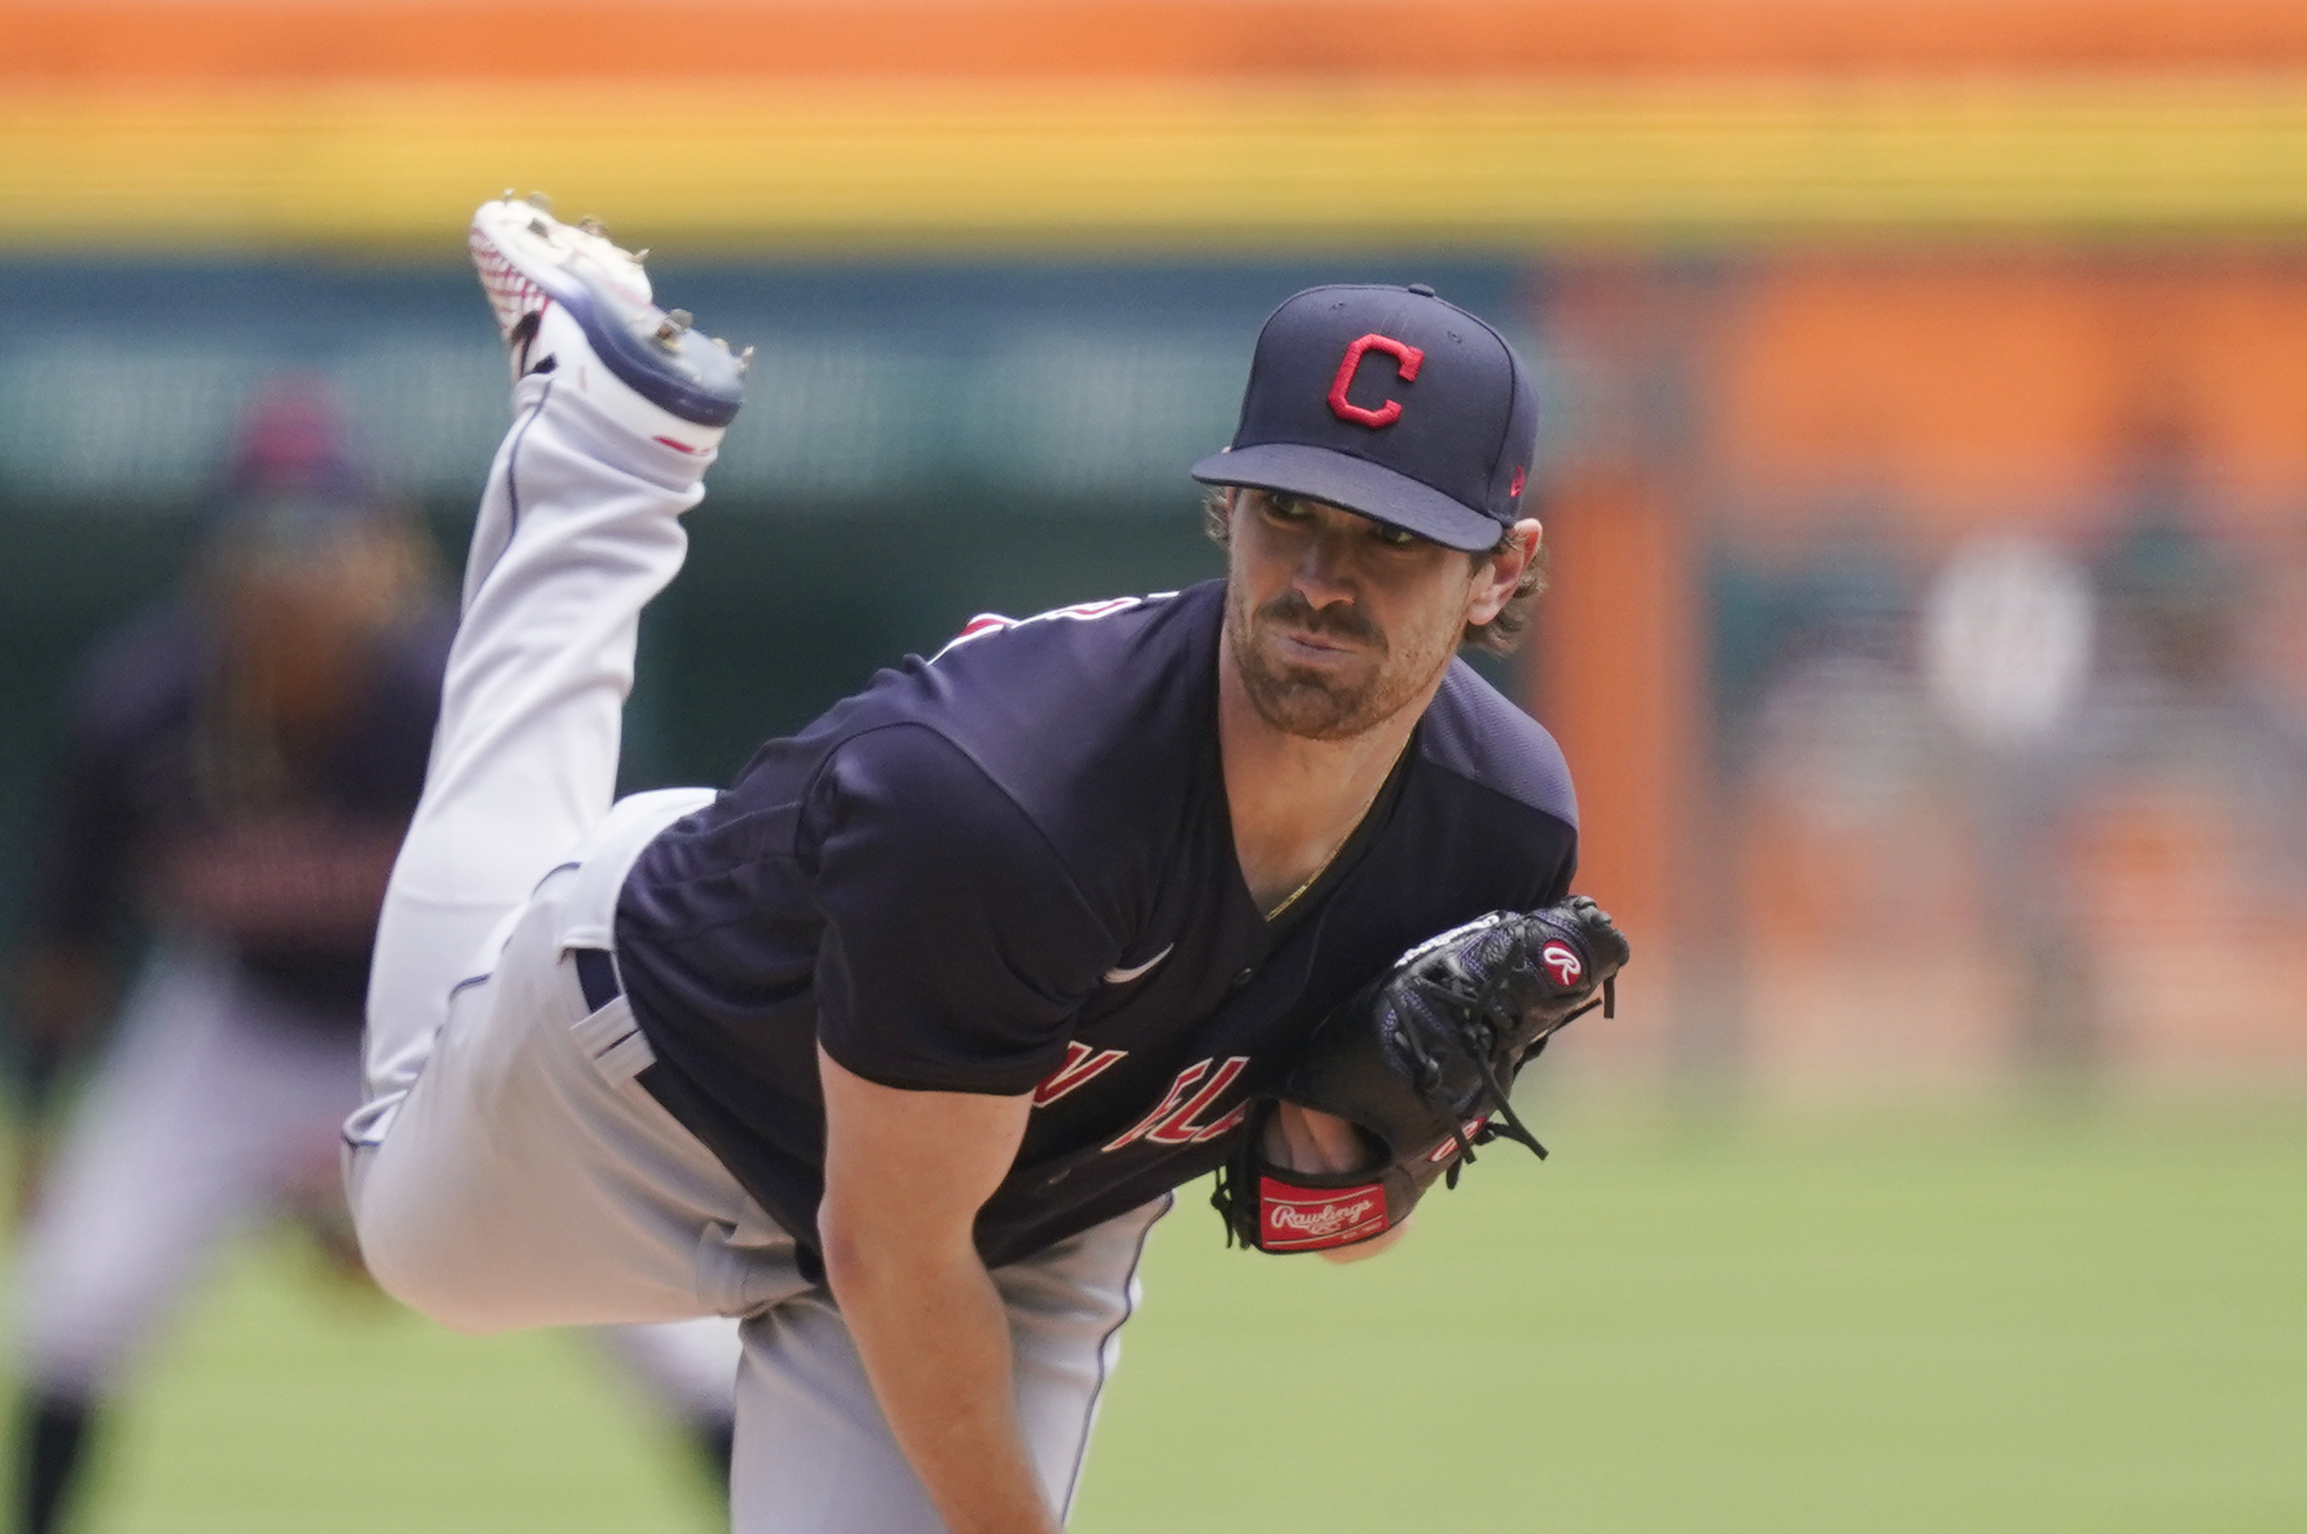 MLB Rookie Profile: Shane Bieber, RHP, Cleveland Indians - Minor League Ball